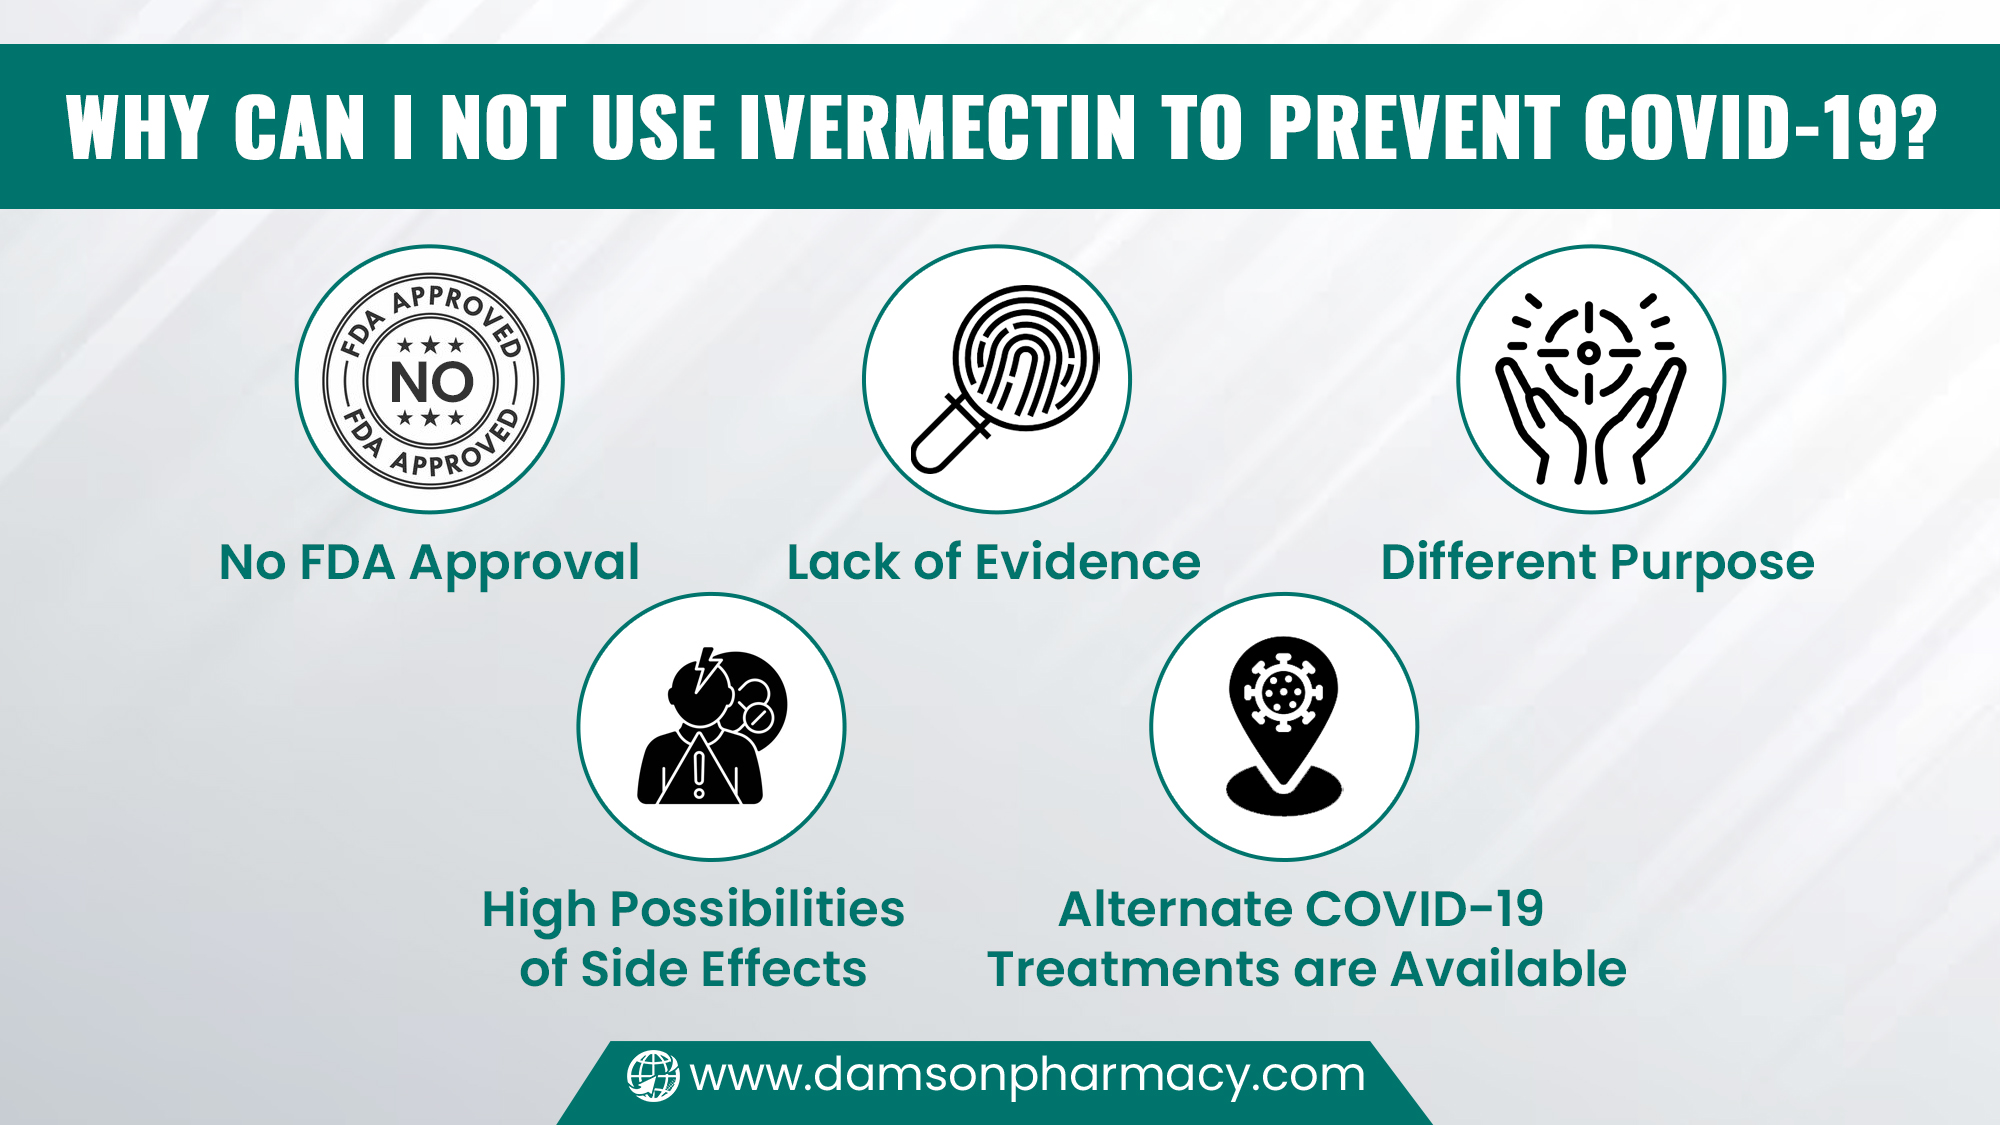 Why Can I Not Use Ivermectin to Prevent COVID-19